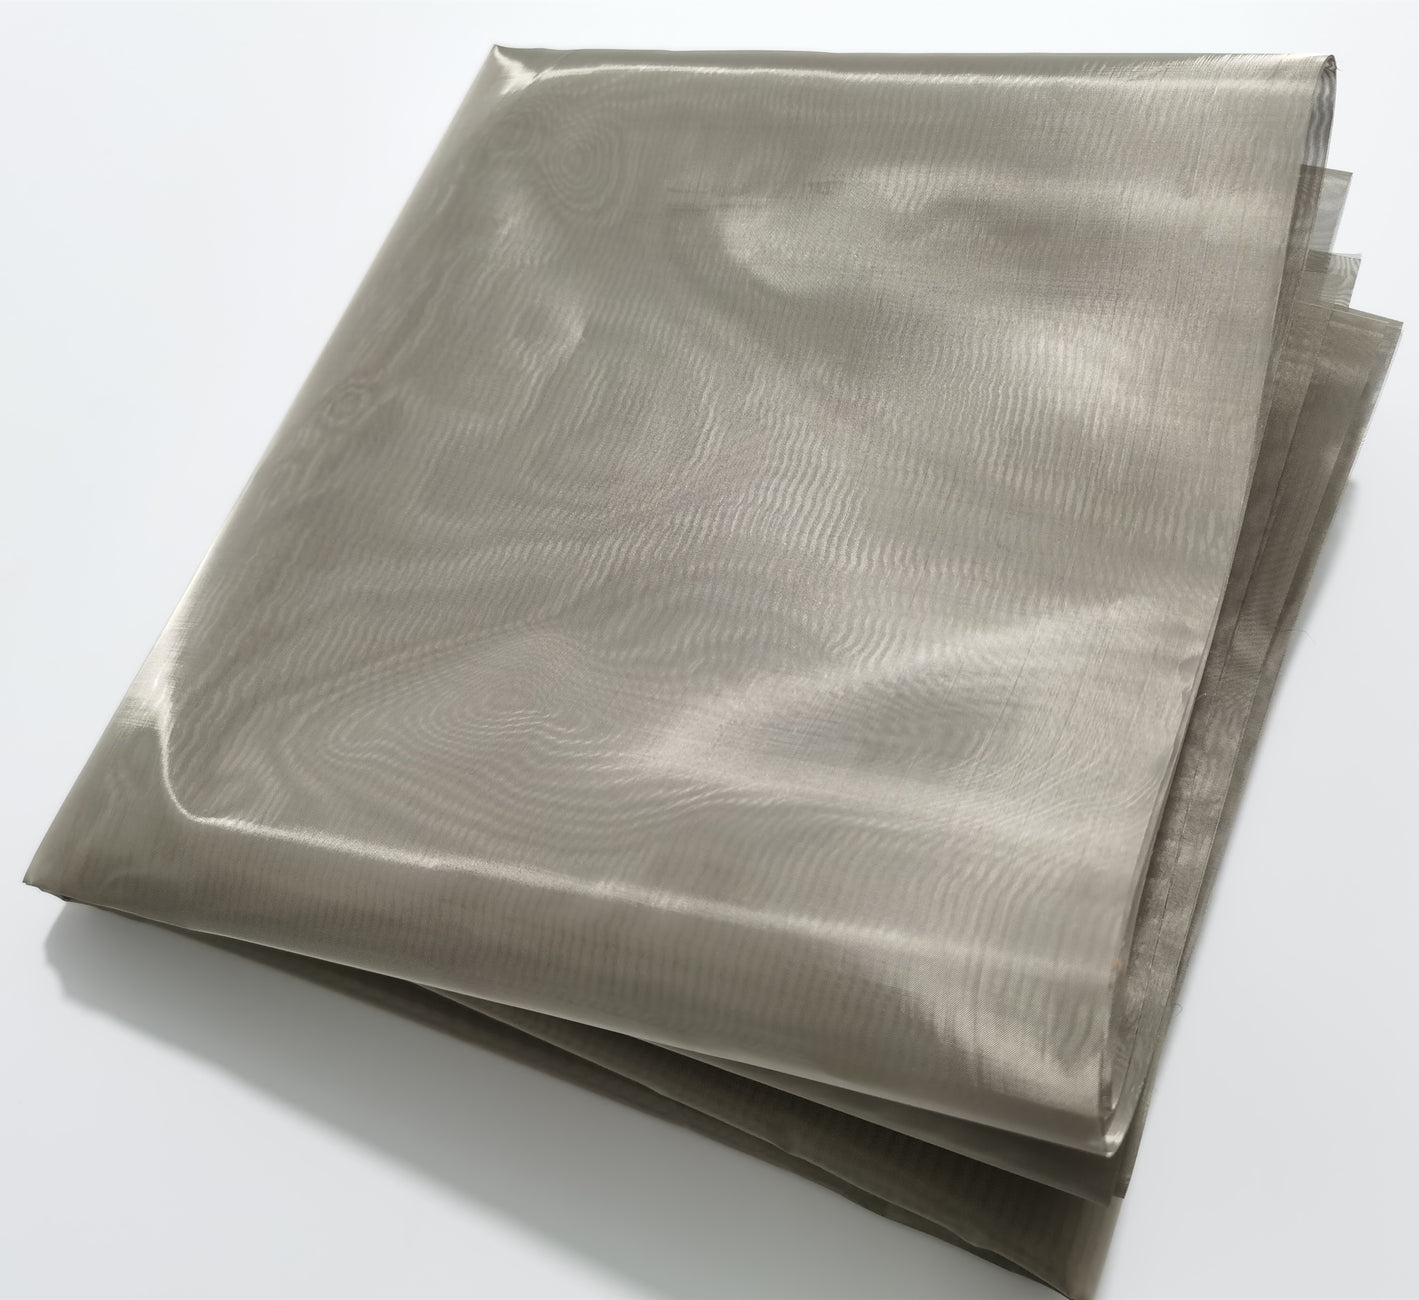 Transparent Copper Fabric Blocking RFID/RF-Reduce EMF/EMI Protection Conductive Fabric Air Permitted